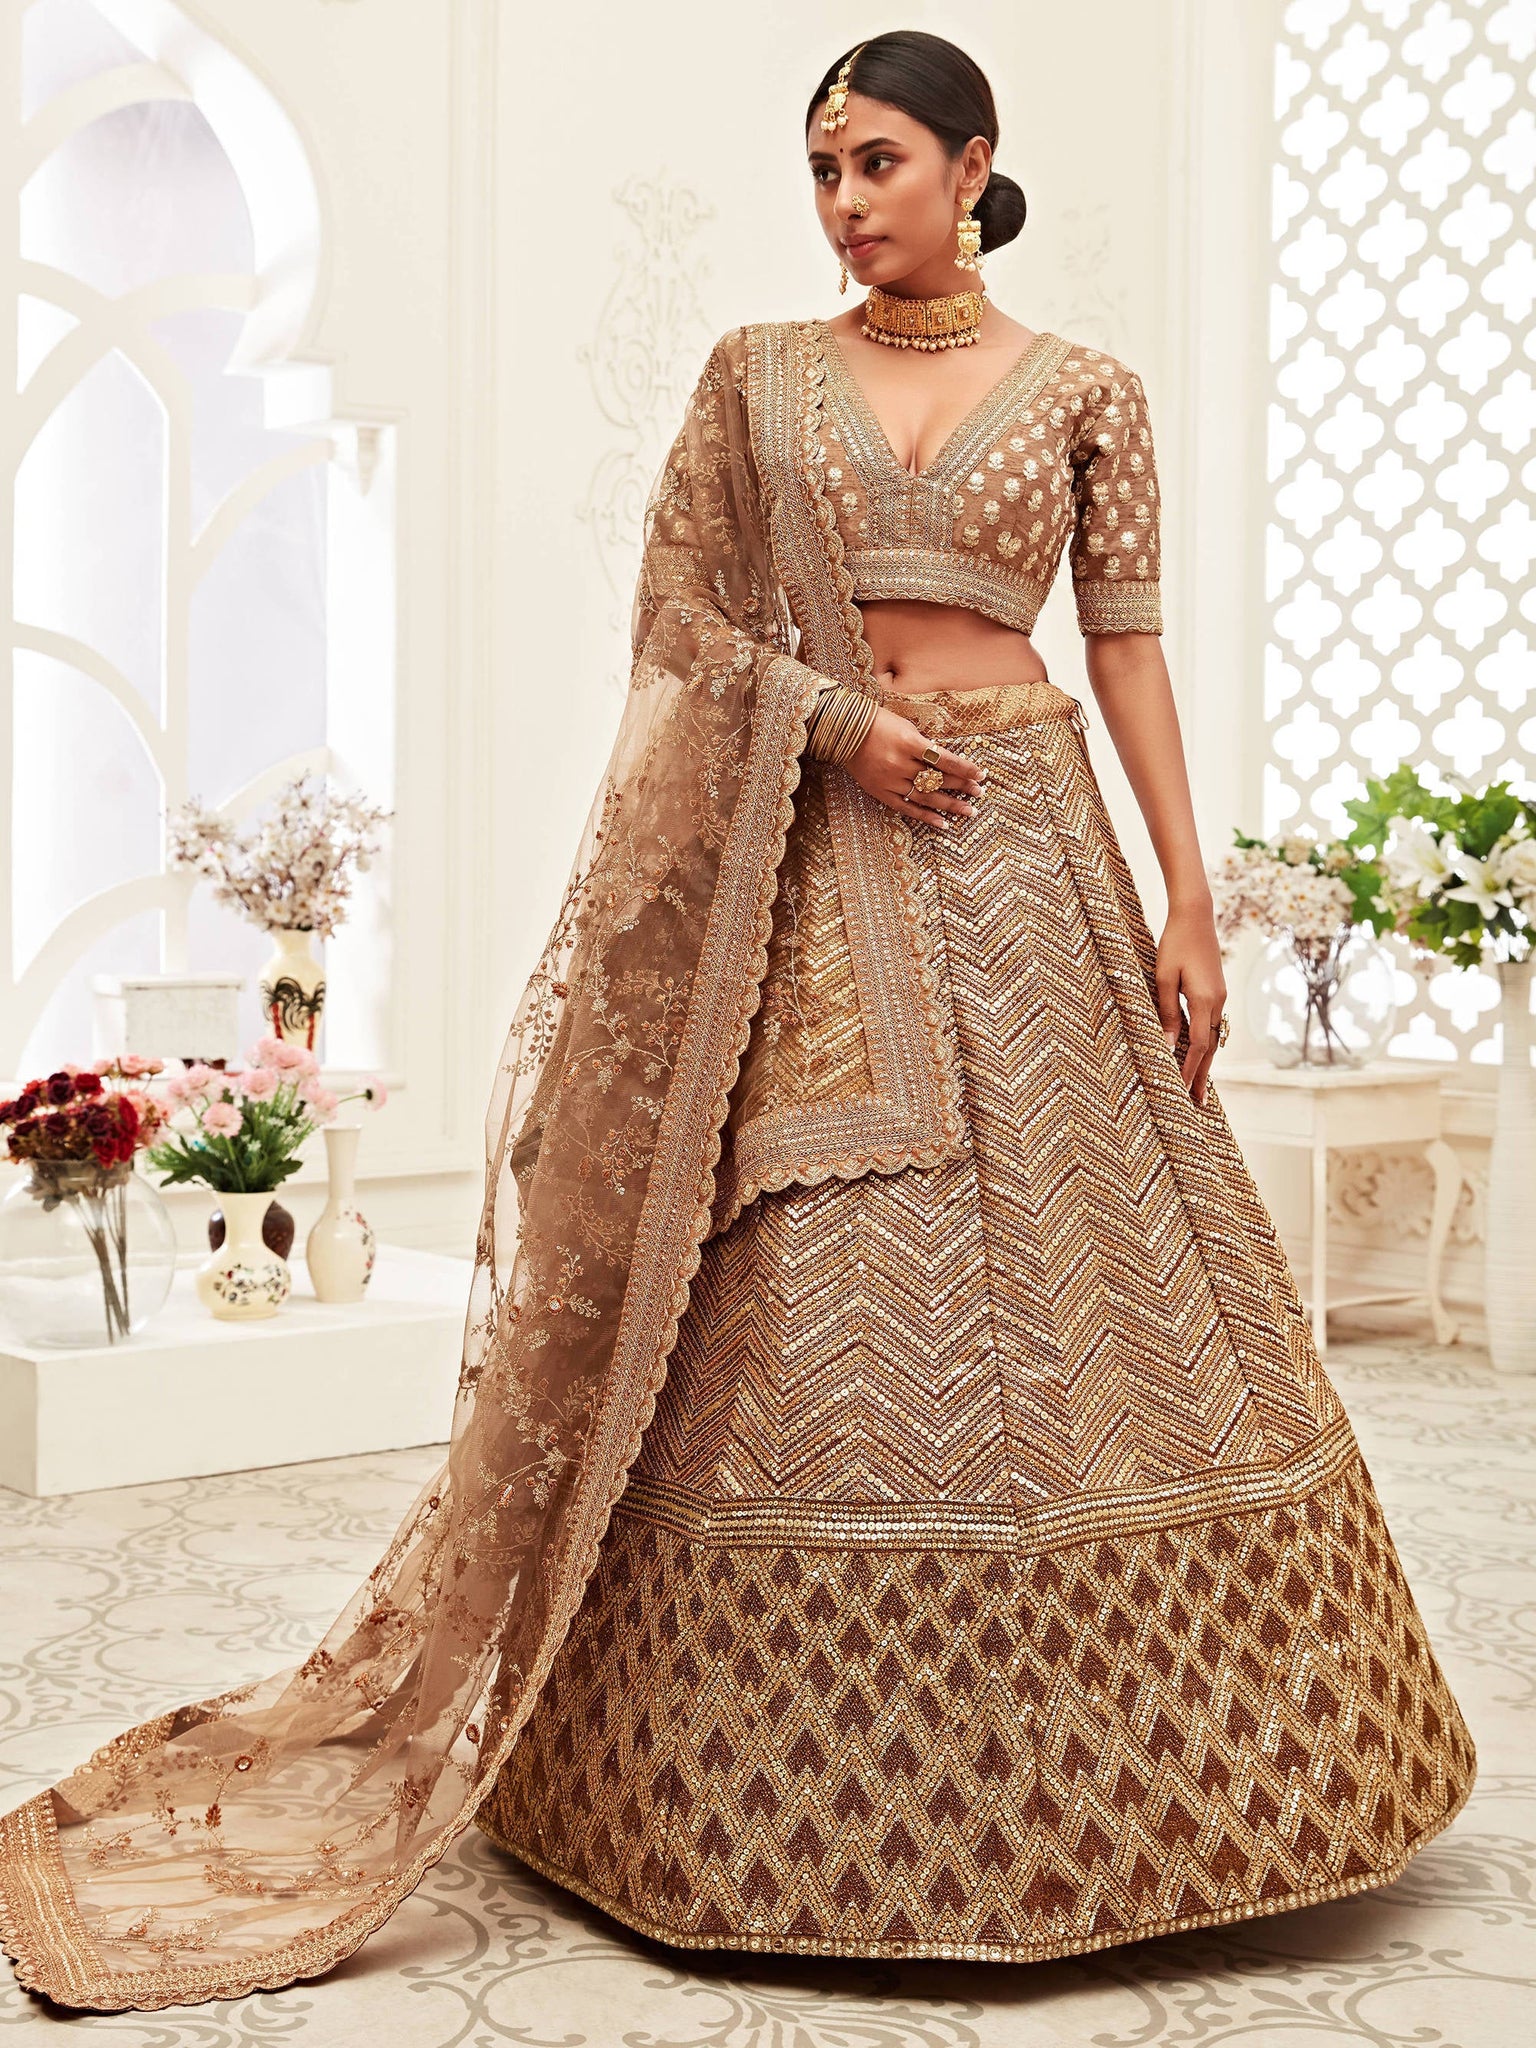 Best Places & Markets for Bridal Shopping In India - Wish N Wed